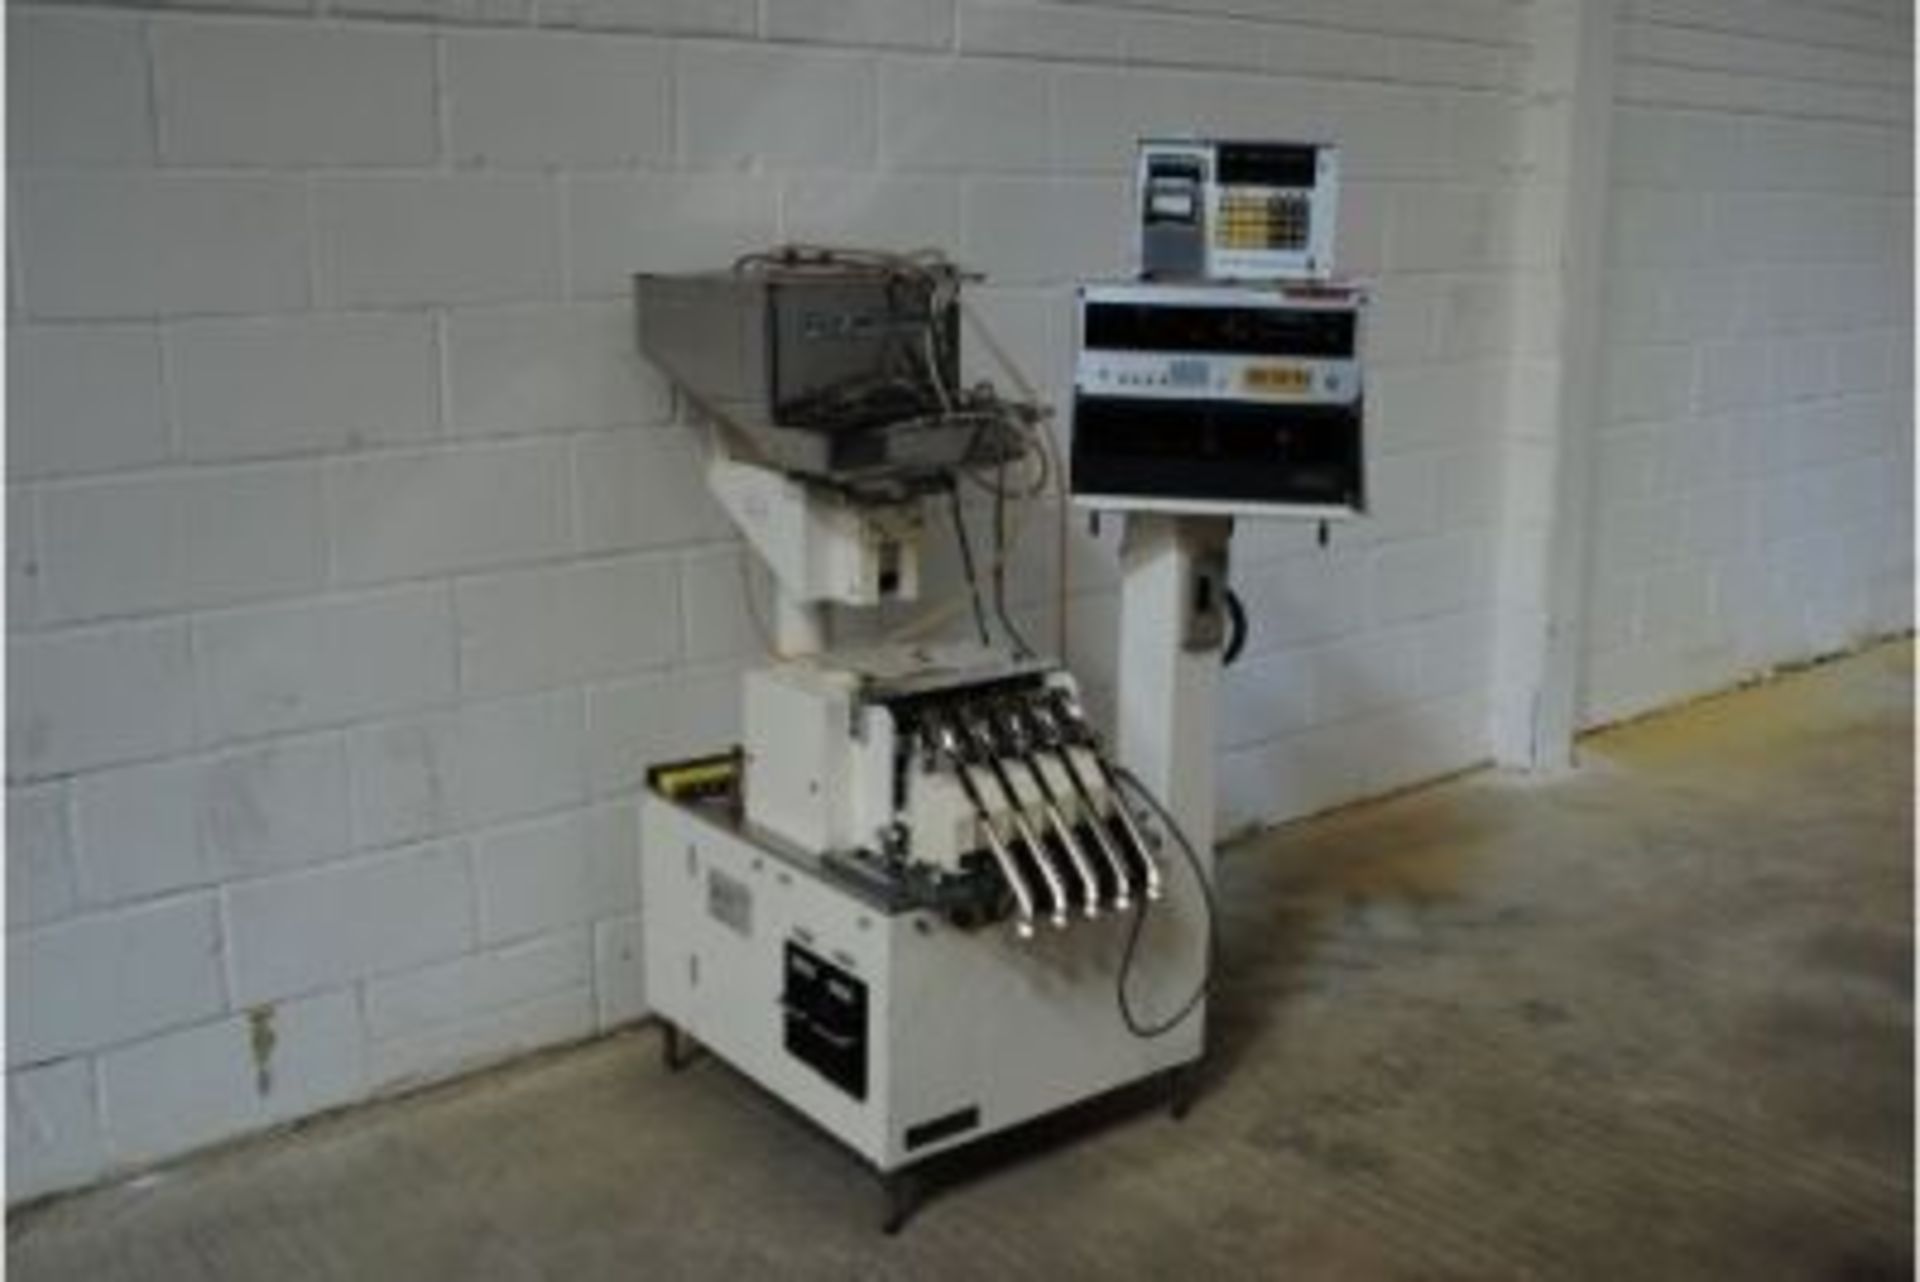 Aniritsu Capsule / Tablet Checkweigher Model: K51 5D with K261d Data Recorder S/N:A306 - Image 2 of 8